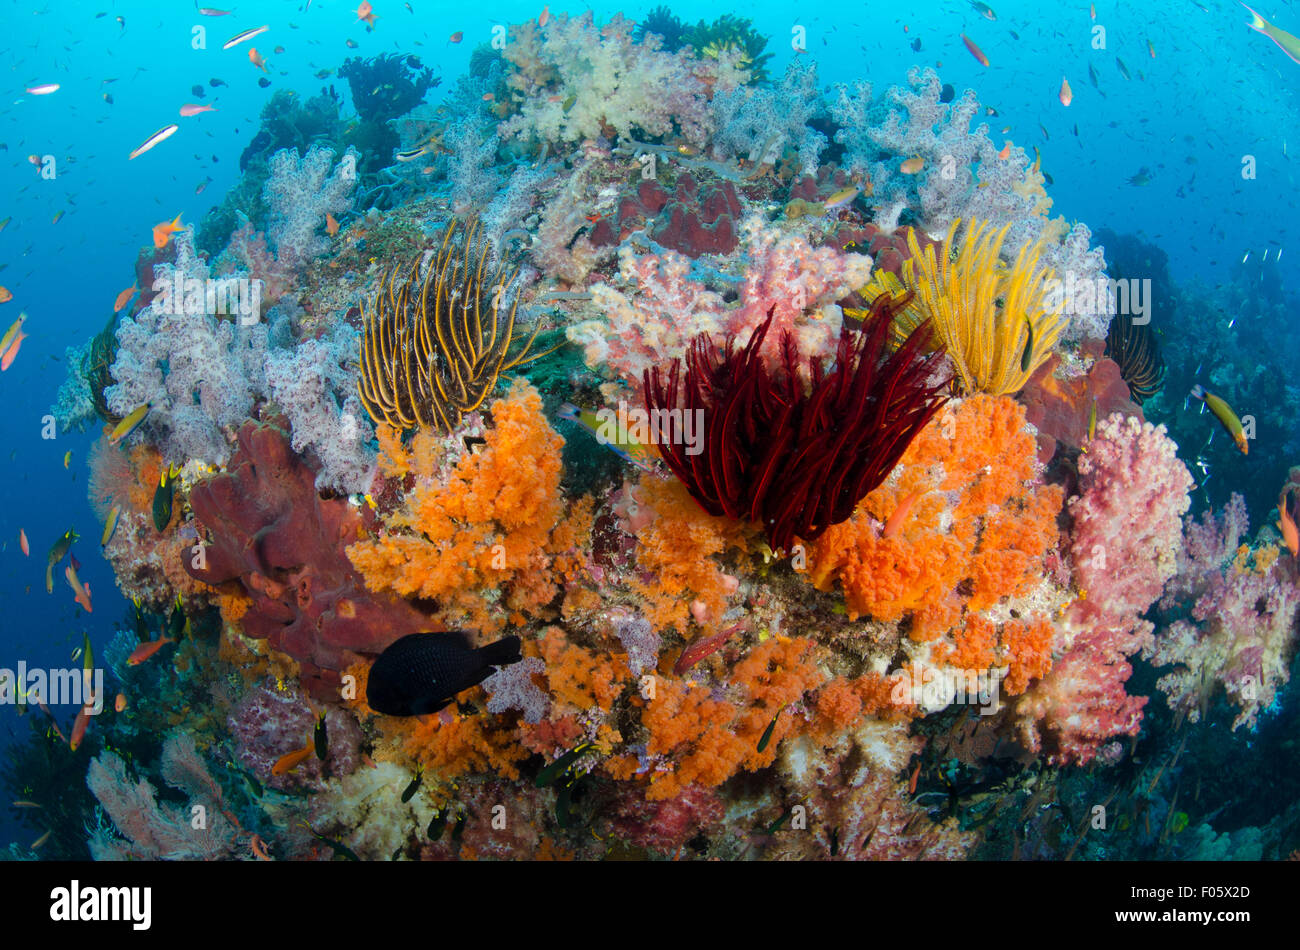 Crinoids and soft corals, Dendronephthya sp., Four Kings, Raja Ampat, Indonesia, Pacific Ocean Stock Photo